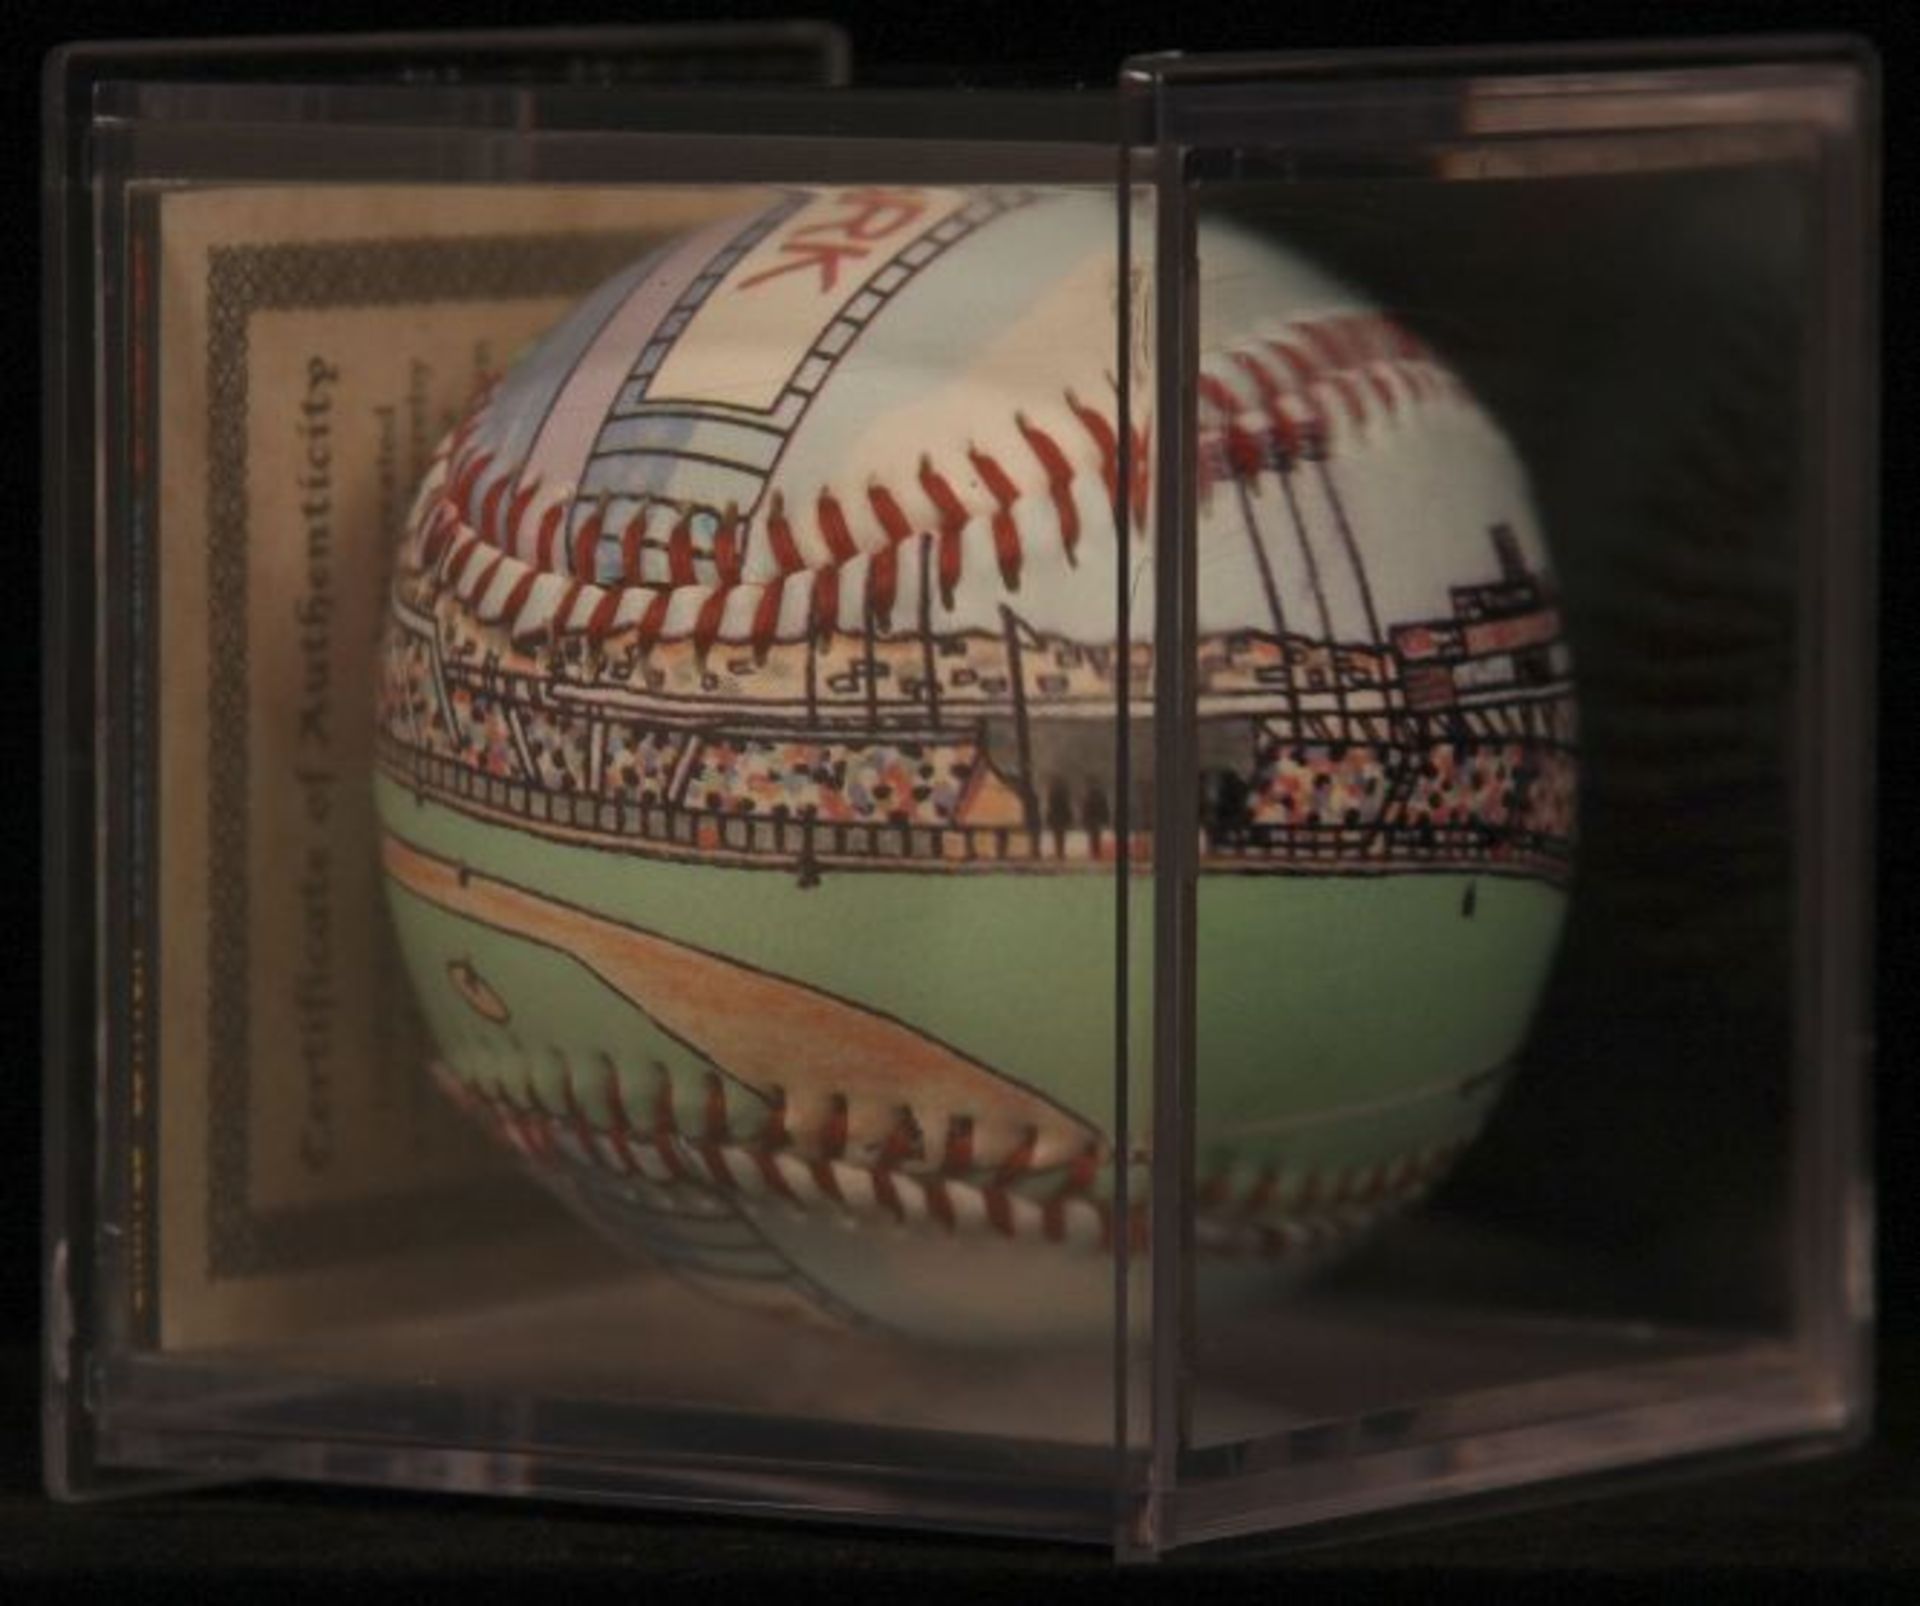 Unforgettaball! "Candlestick Park" Collectable Baseball - Image 5 of 6